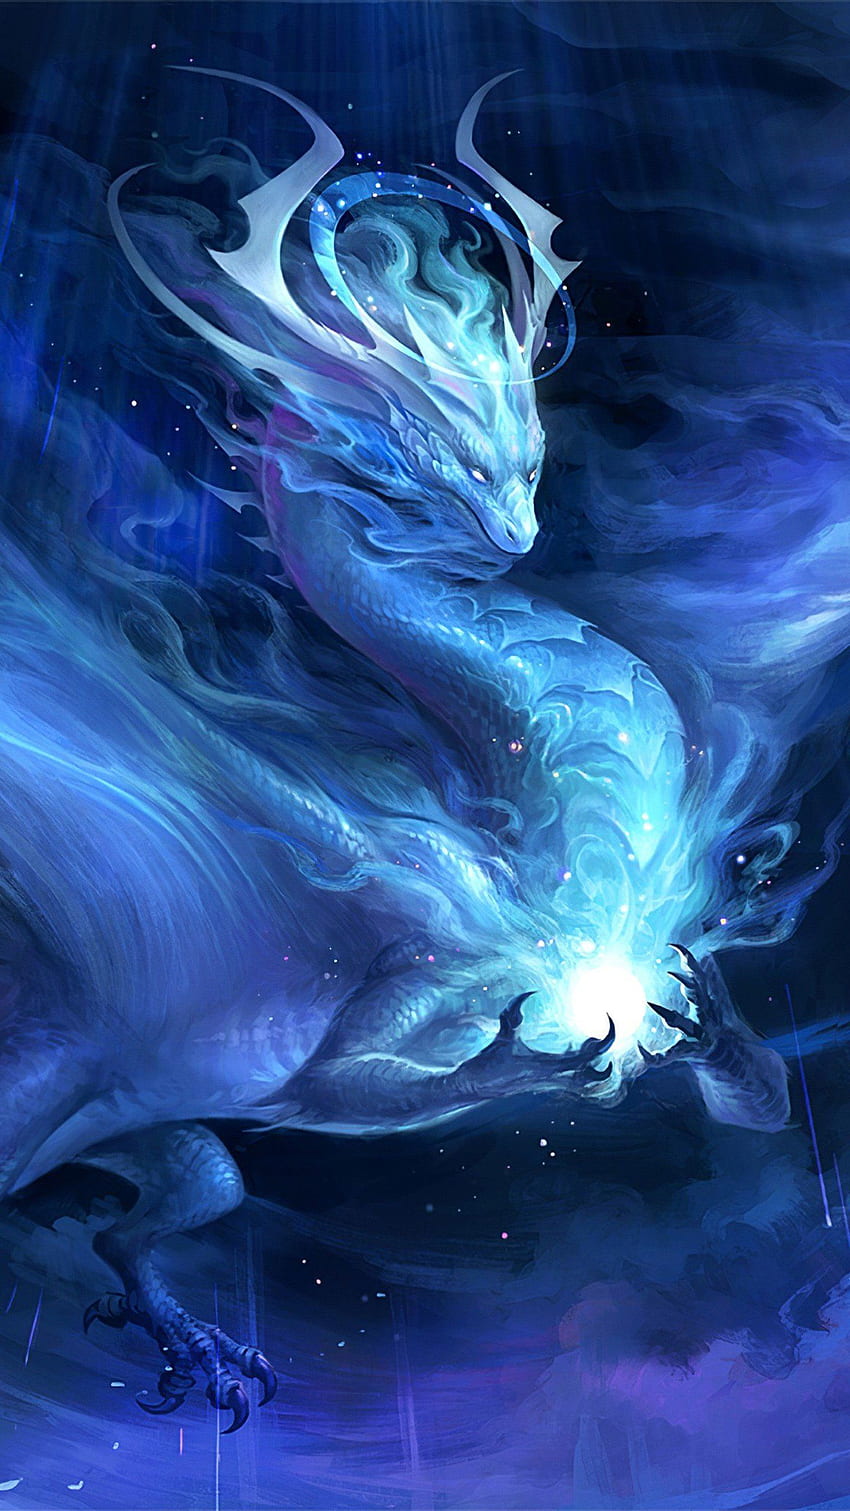 Meteor Dragon Galaxy Cosmos , Artist and ID. Fantasy creatures art, Dragon artwork fantasy, Mythical creatures art, Beautiful Mythical HD phone wallpaper